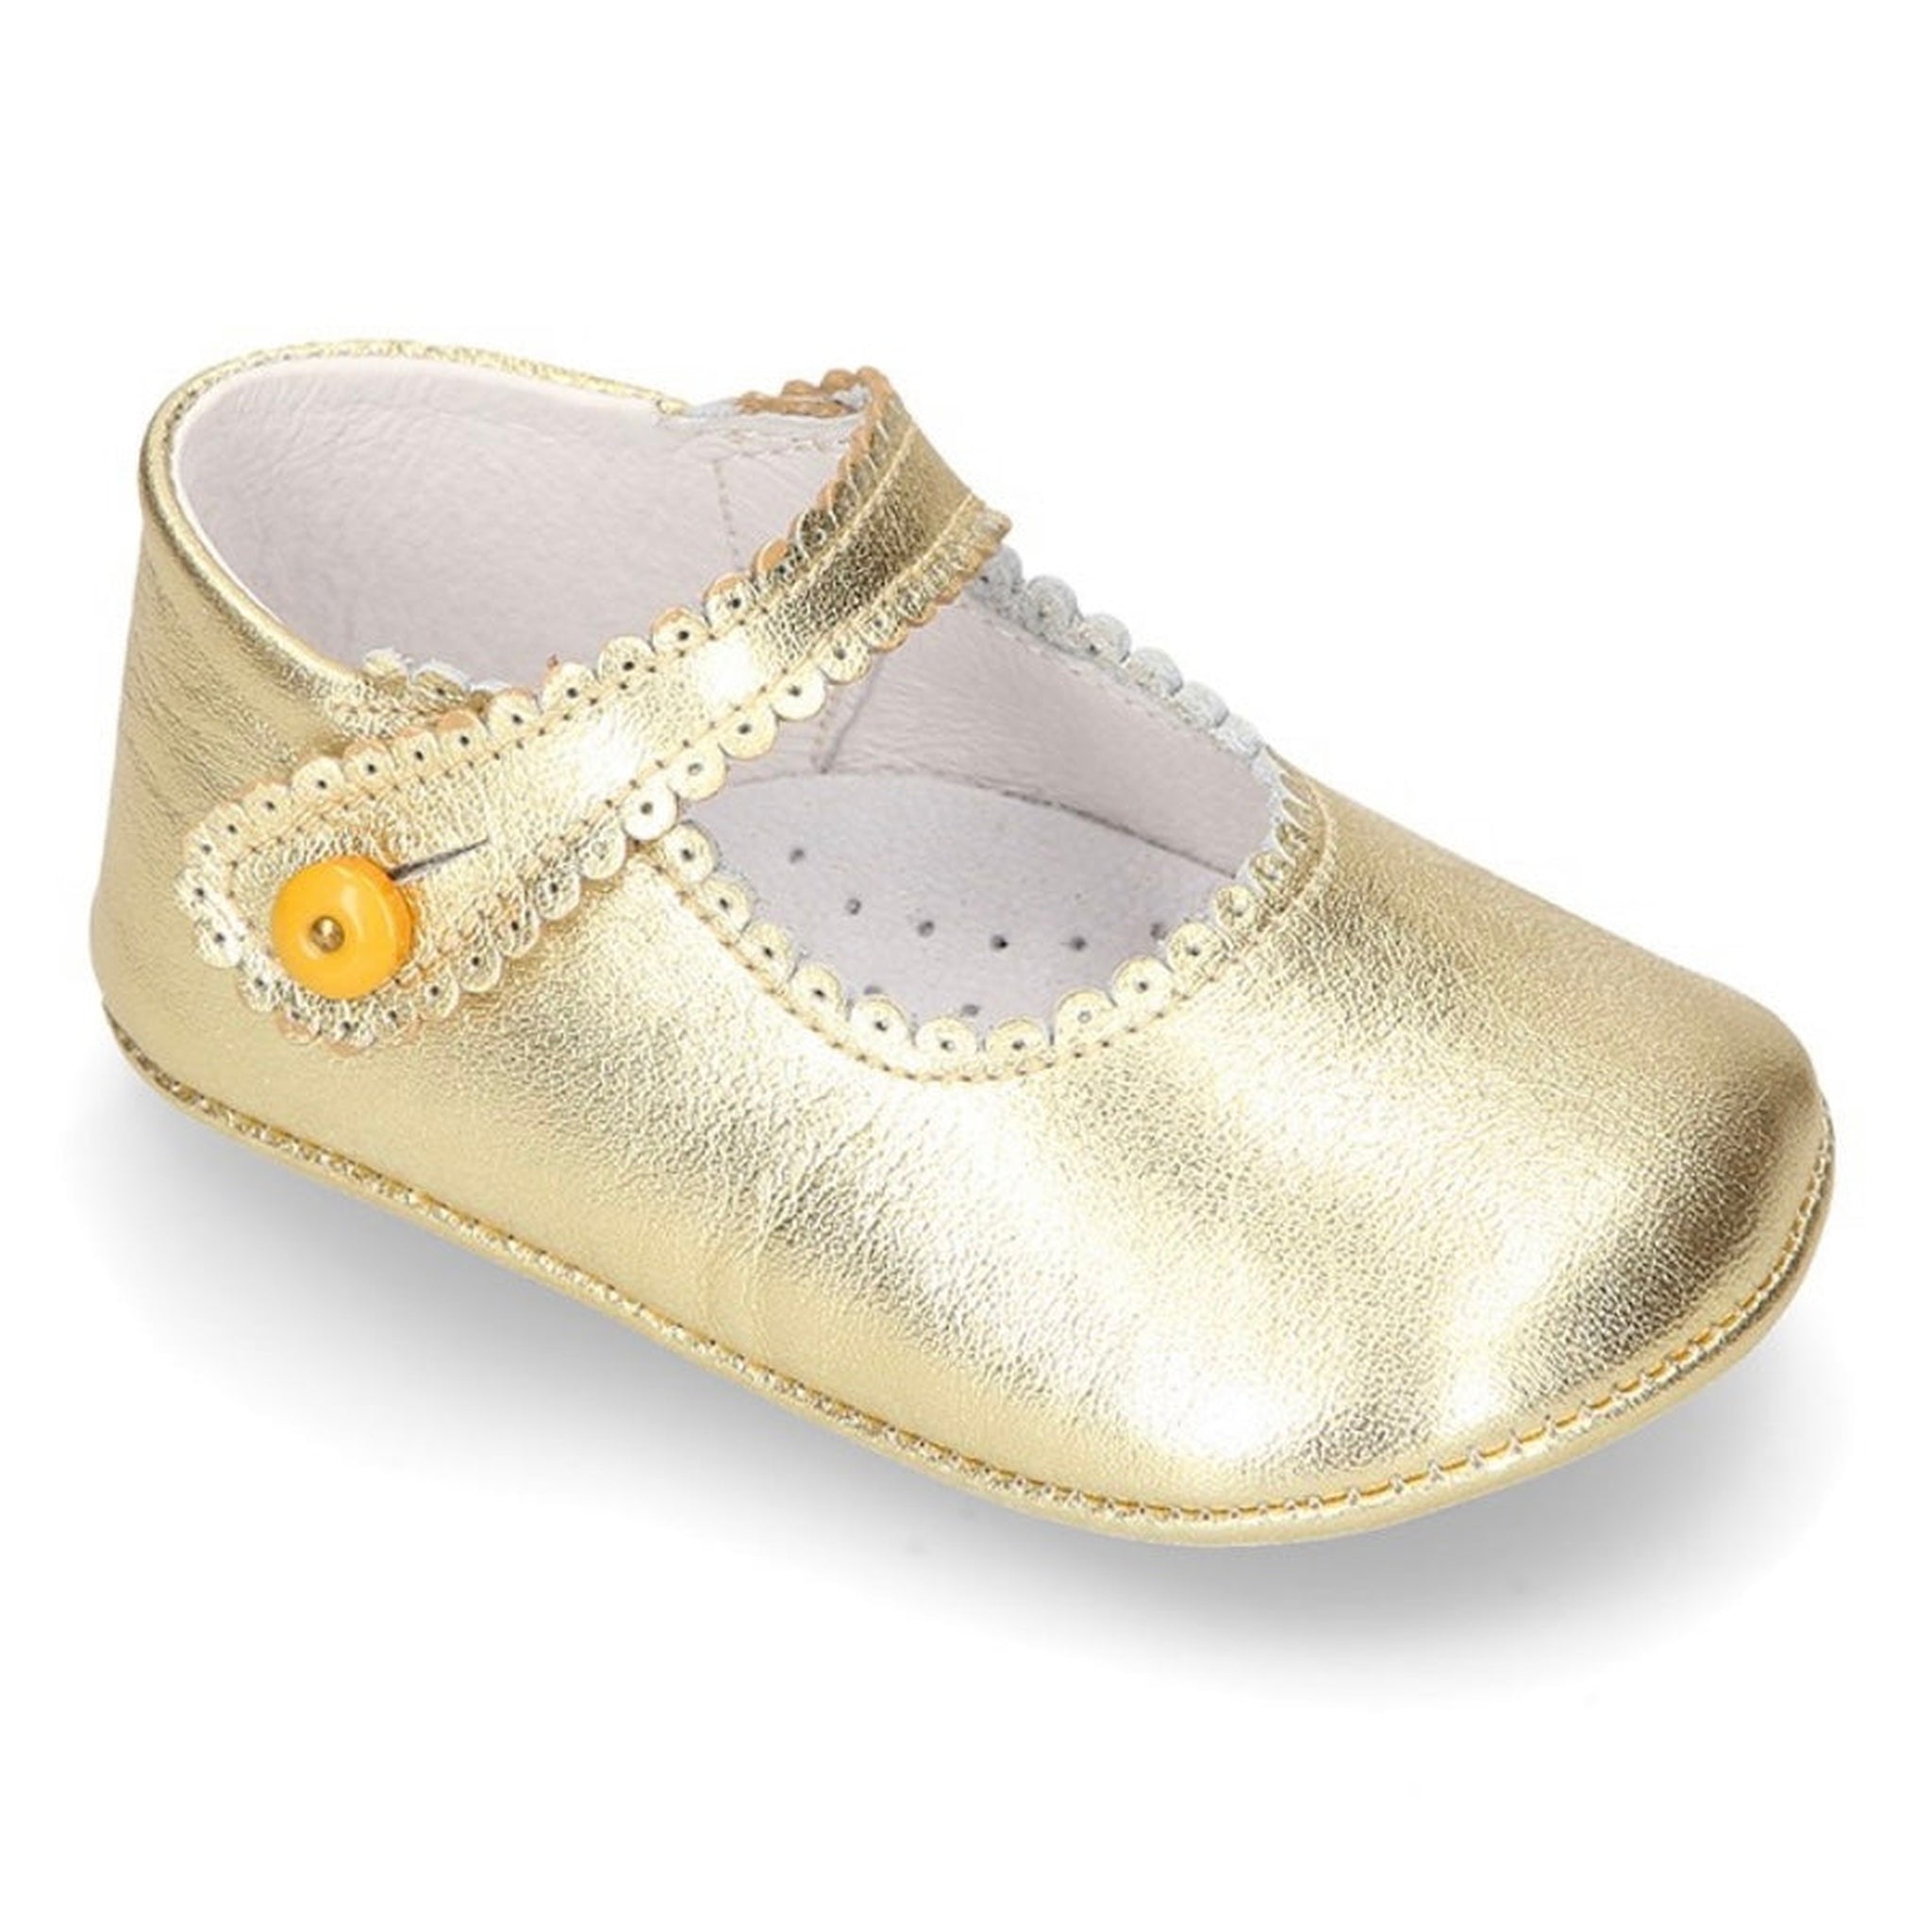 Mary Jane Leather Crib Shoes - Gold